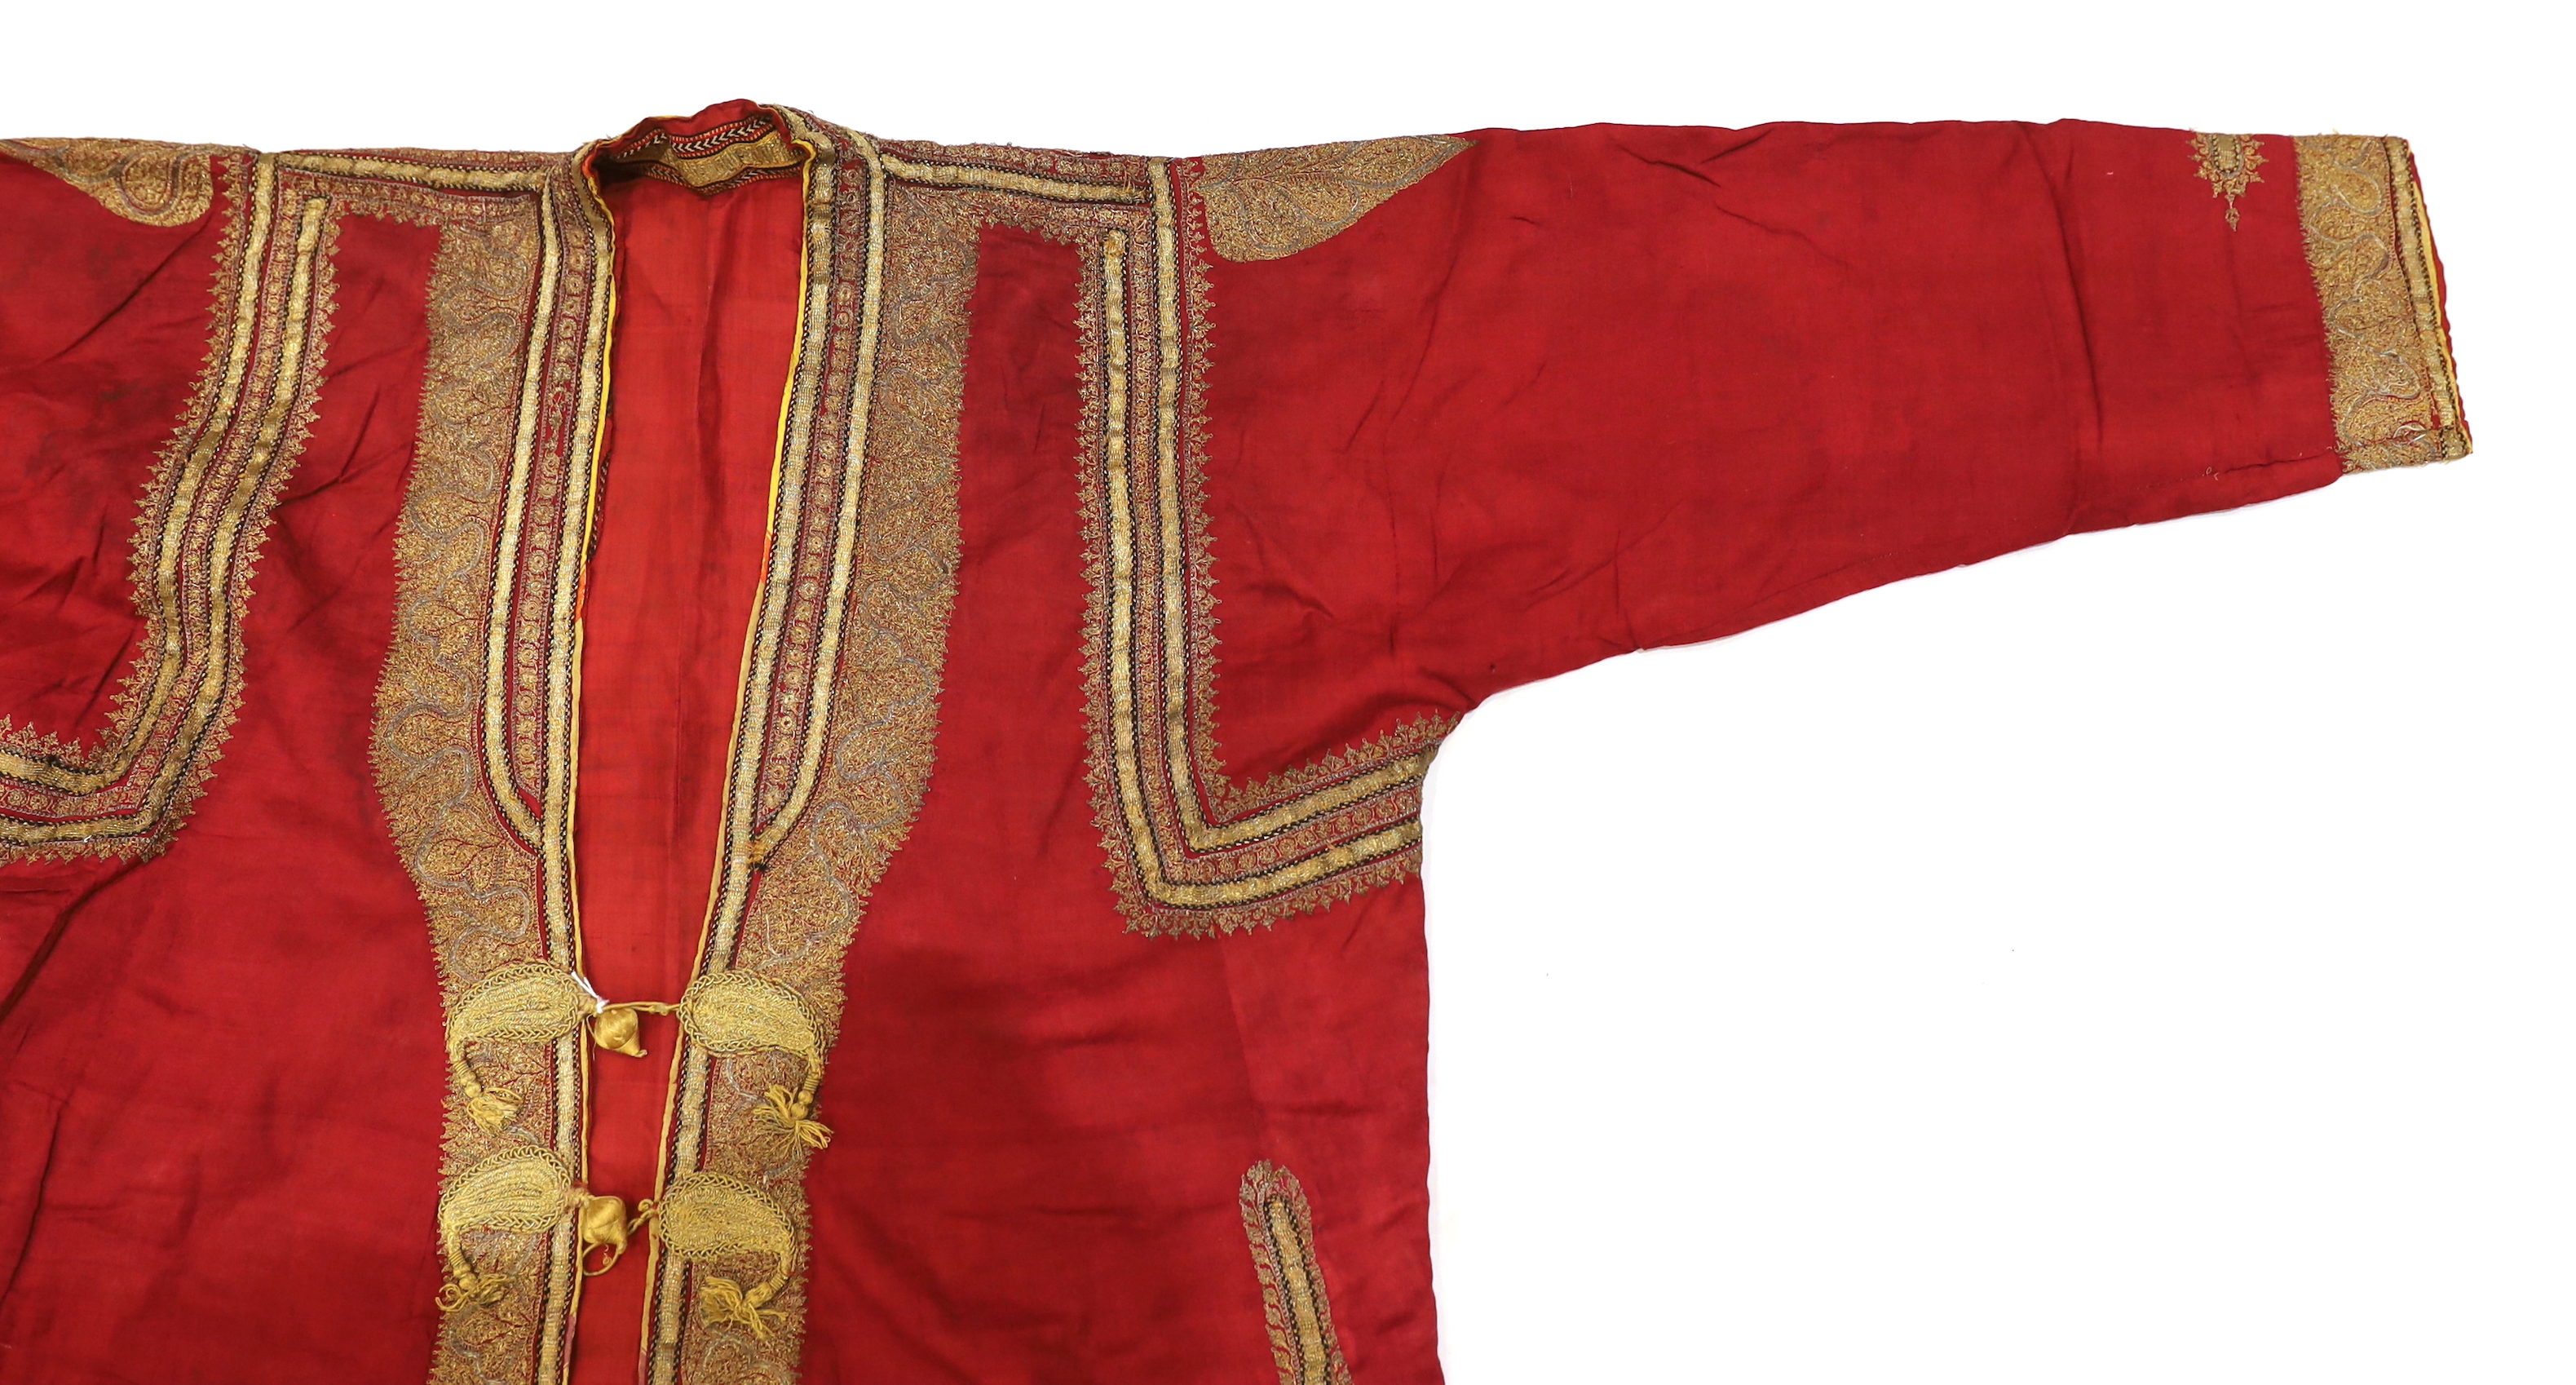 A late 19th century gentleman’s quilted red silk Indian Chogha, embroidered with ornate gold and silver metallic thread borders and paisley design details